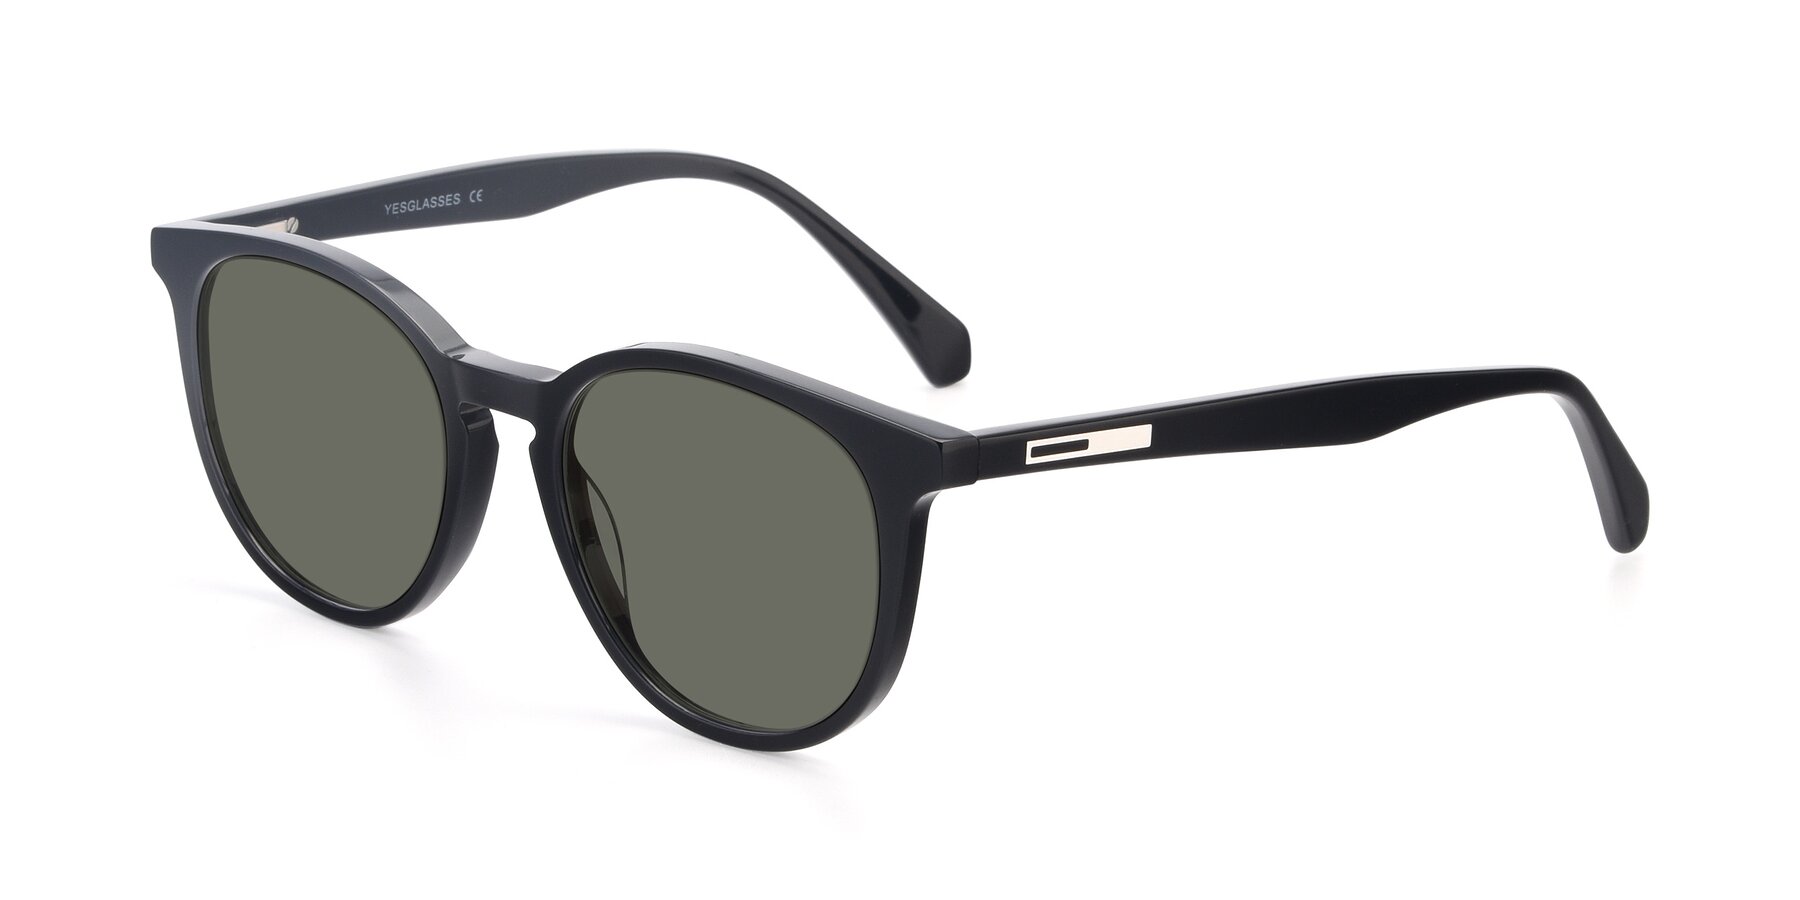 Angle of 17721 in Black with Gray Polarized Lenses